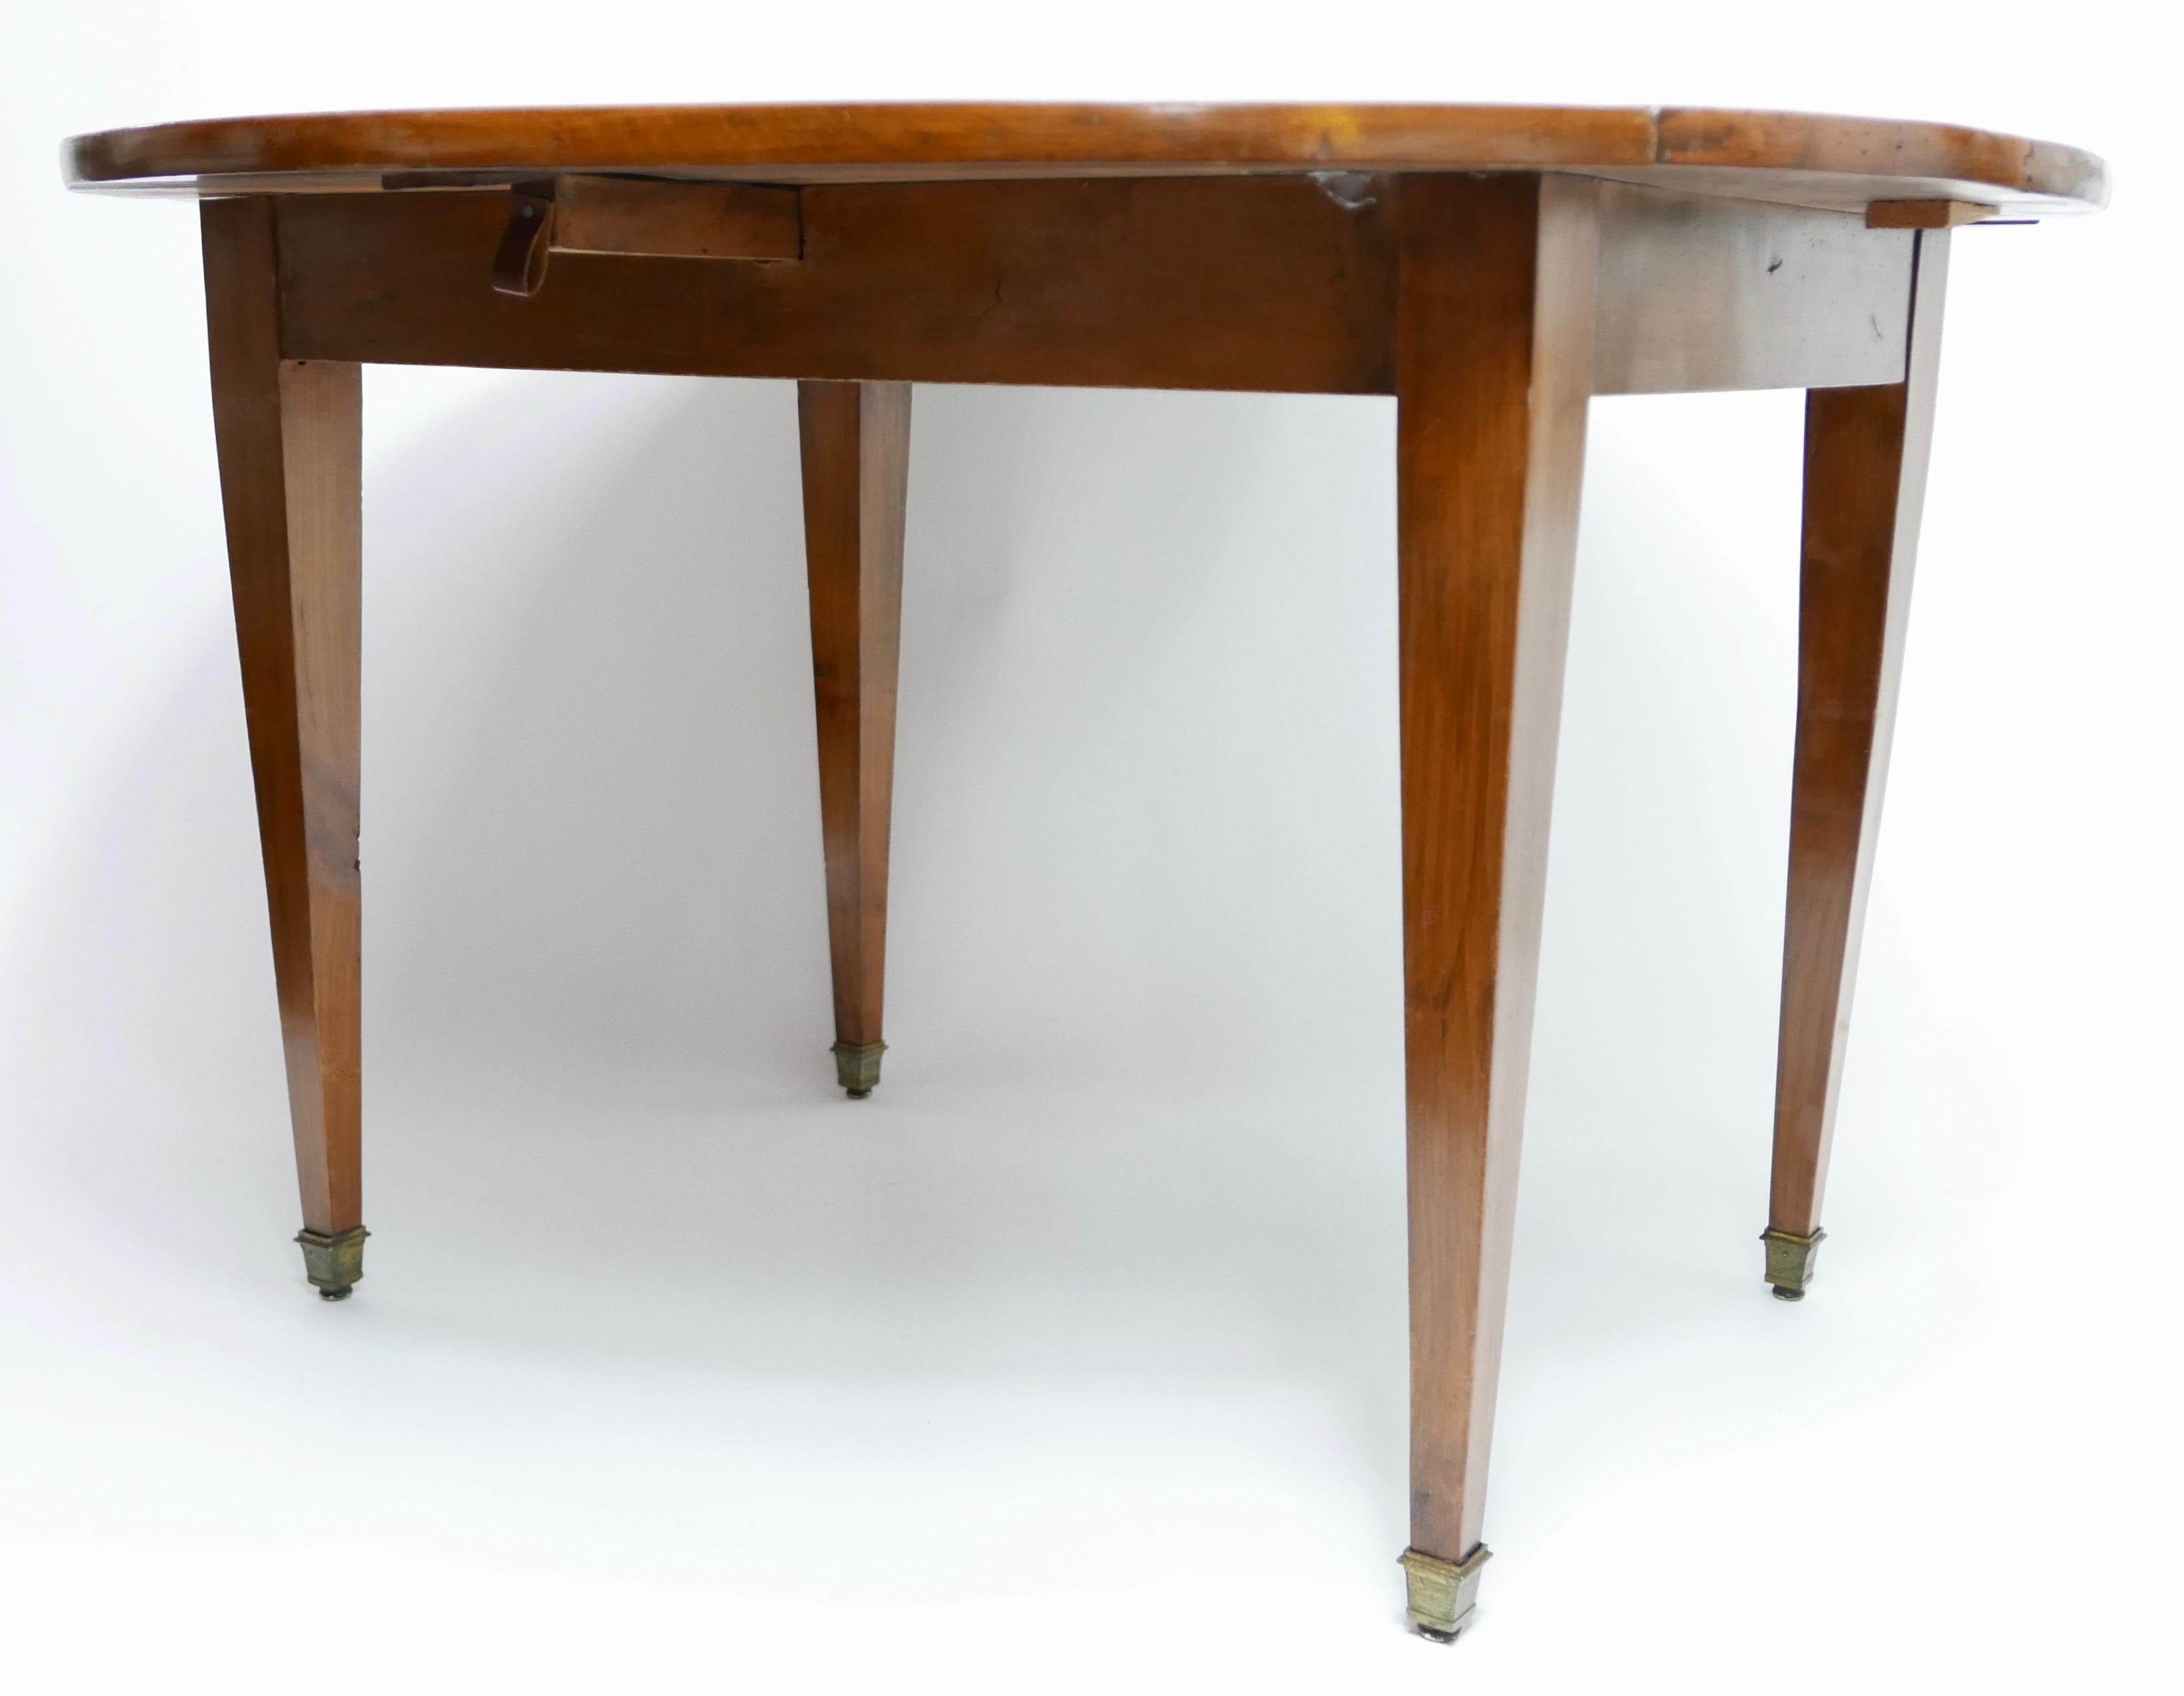 French Cherry Wood Drop-Leaf Table, Early 19th Century 3